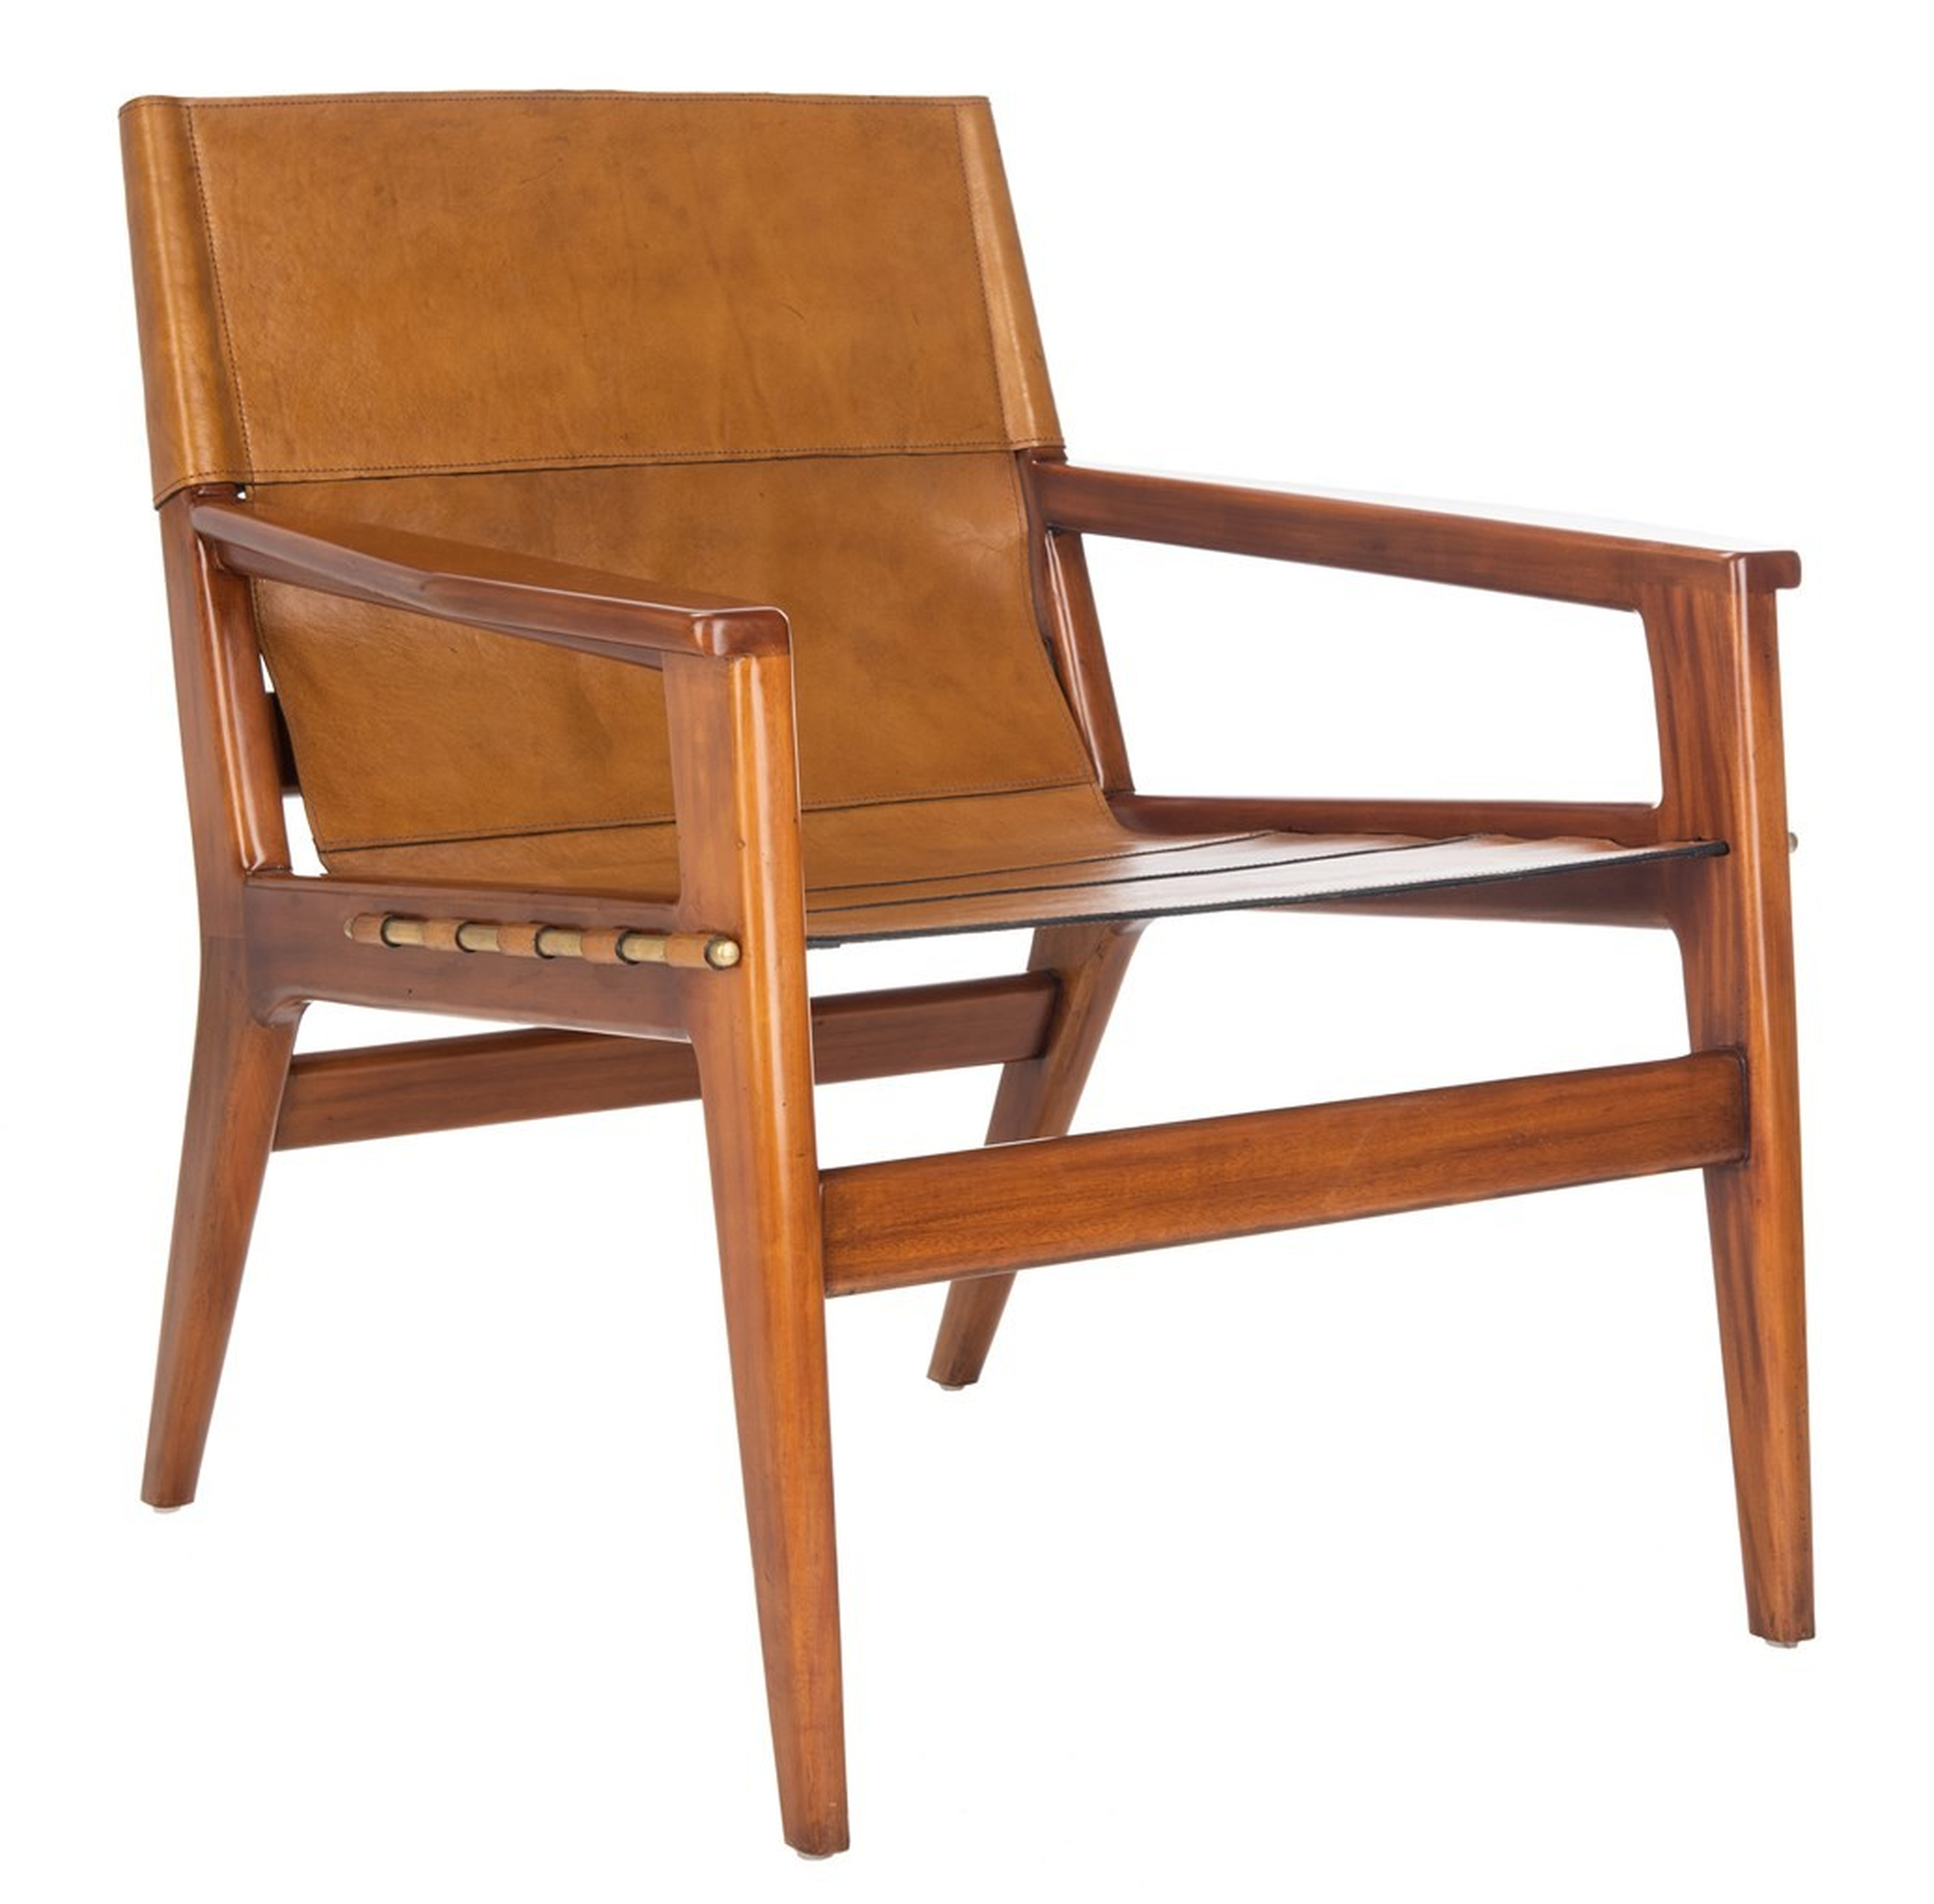 Pavati Leather Sling Chair, Brown - Cove Goods